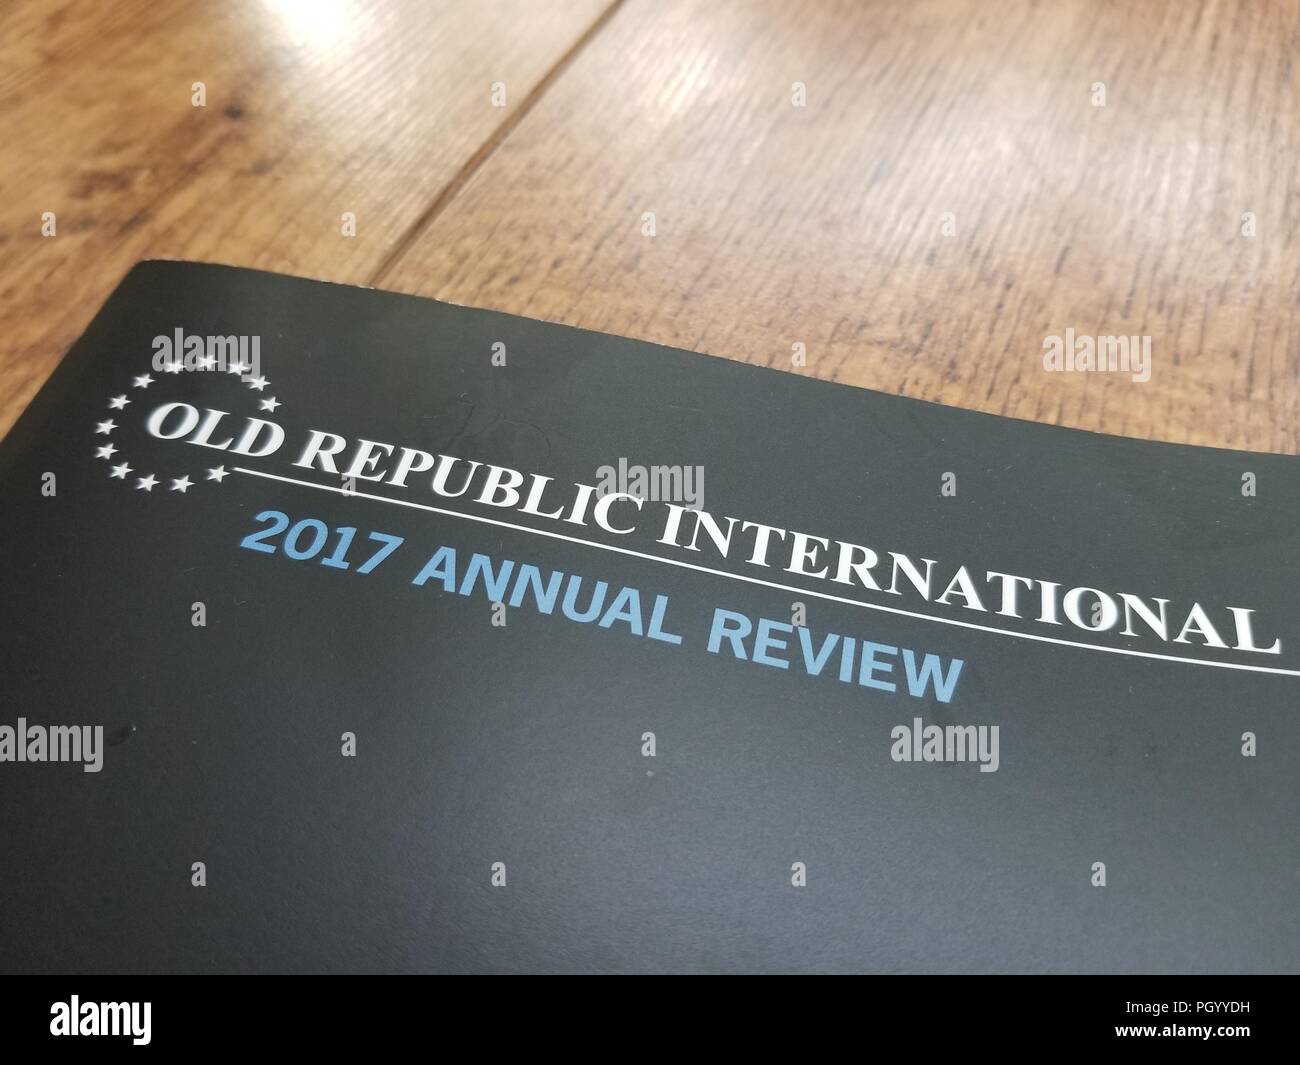 Close-up of annual report with logo for insurance company Old Republic International (ORI) on a light wooden surface, San Ramon, California, August 21, 2018. () Stock Photo